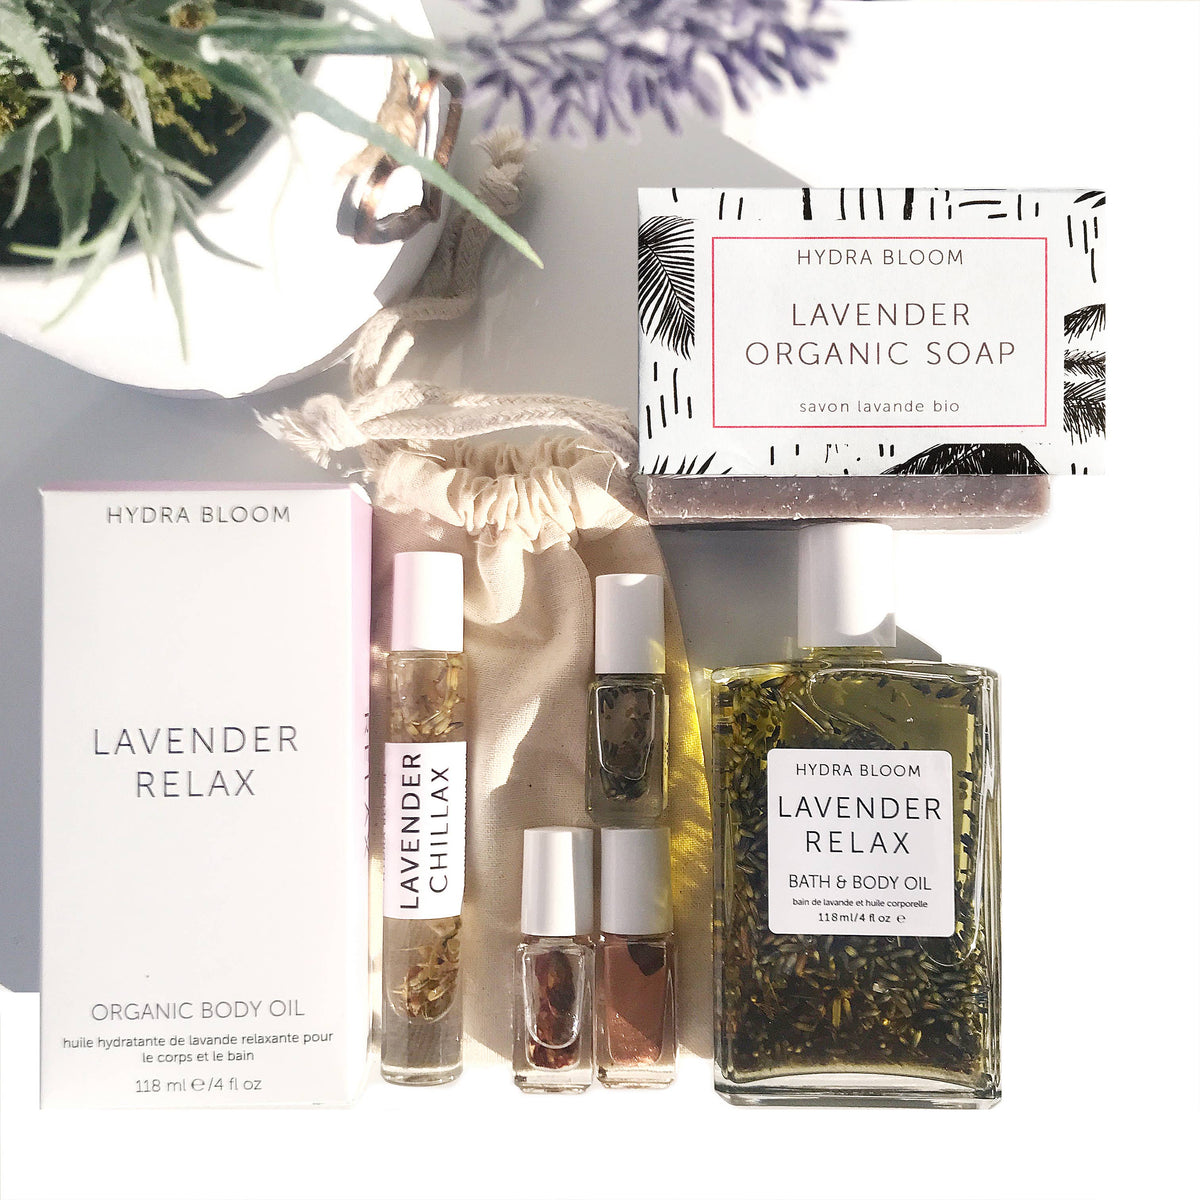 An assortment of Hydra Bloom Beauty Lavender-themed bath products, including organic soap, Hydra Bloom Beauty Luxe Lavender Bath and Body Oil, and small perfume rollers, displayed elegantly with natural light and a sprig of lavender.